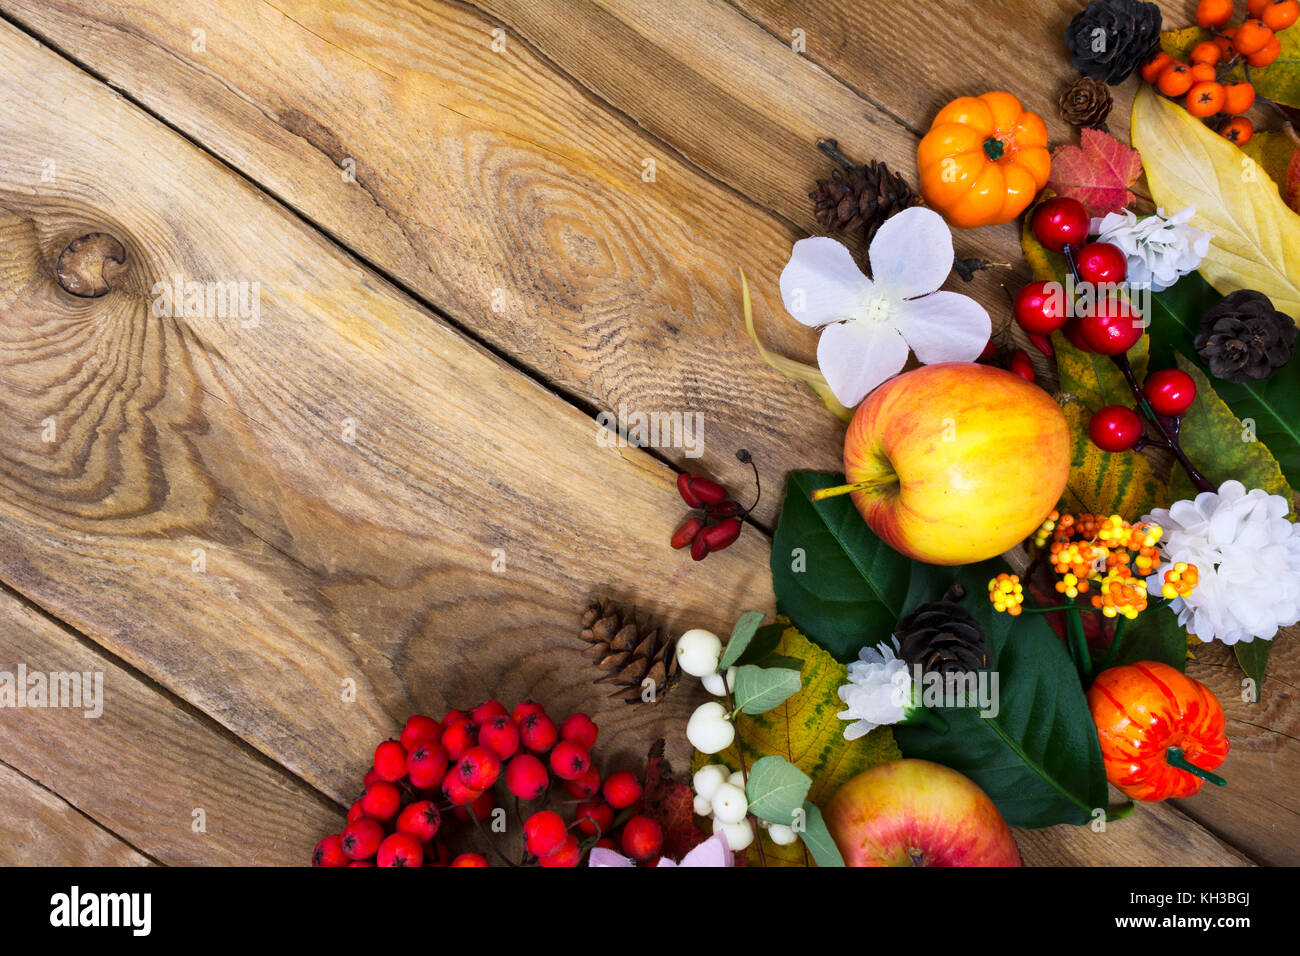 Thanksgiving or fall greeting background with pumpkins, apples, autumn leaves and white flowers arrangement on the rustic wooden table, copy space Stock Photo